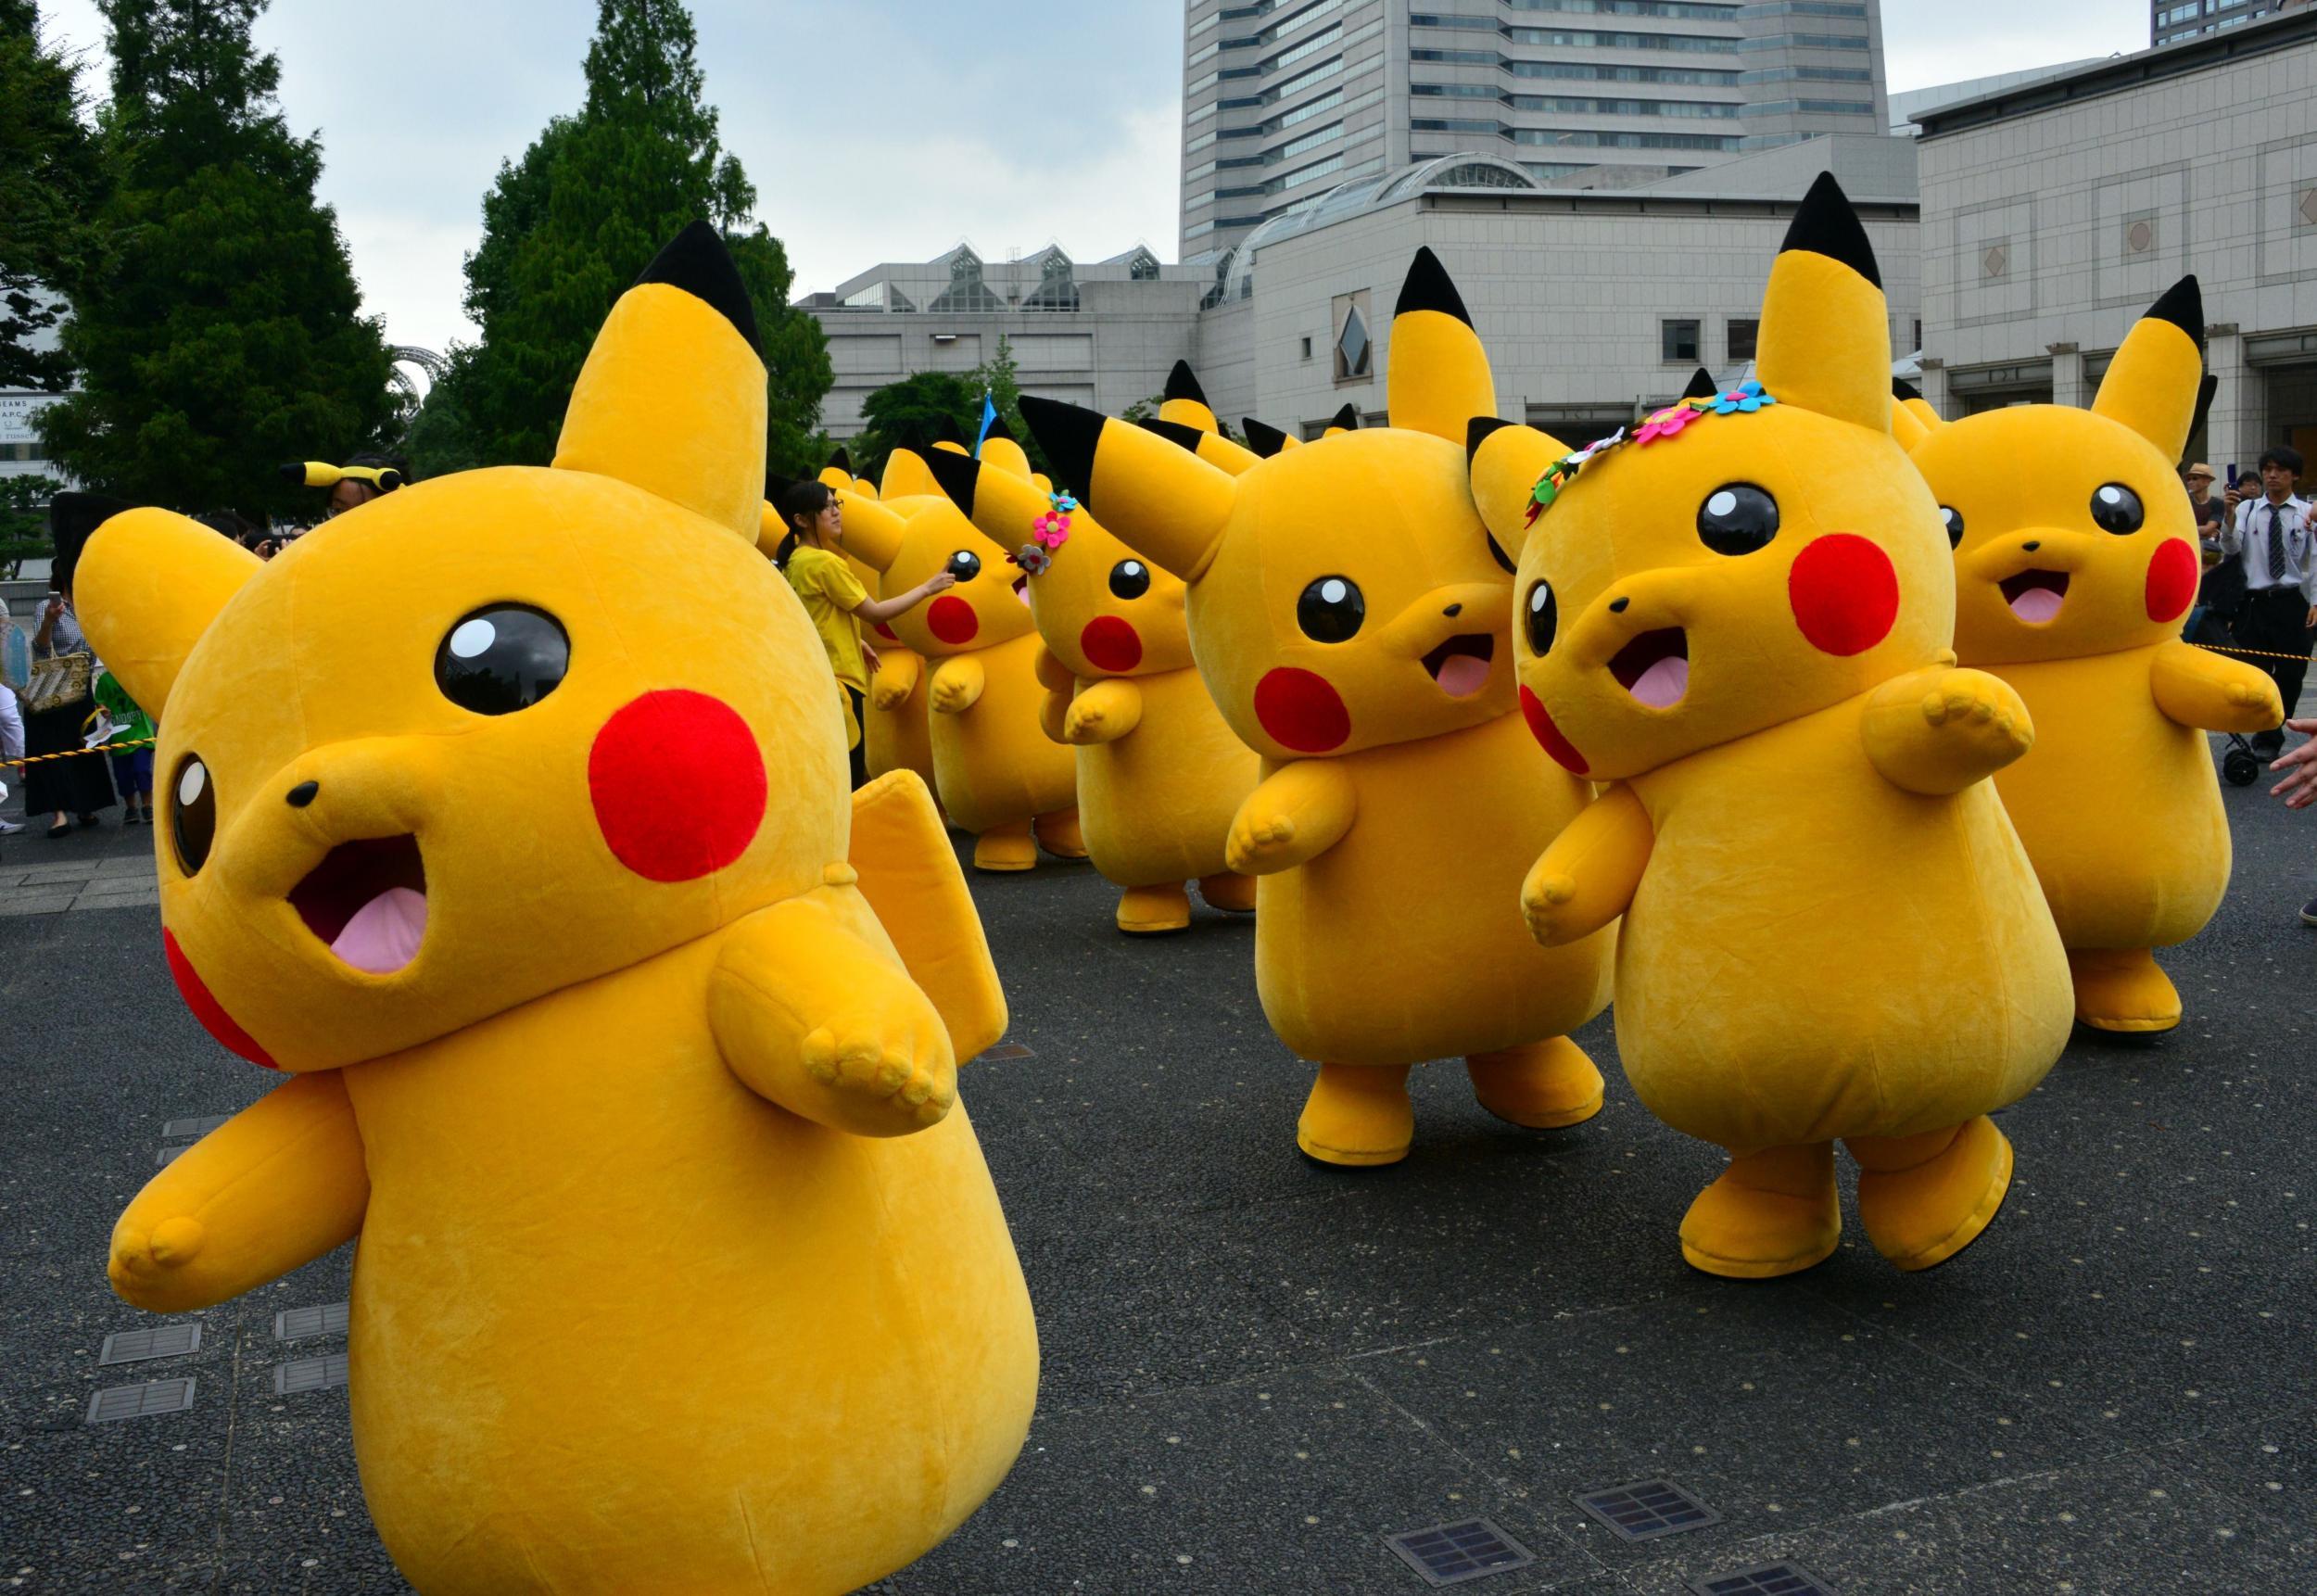 Love Pokémon? An alternative trip to its spiritual home of Tokyo could be for you